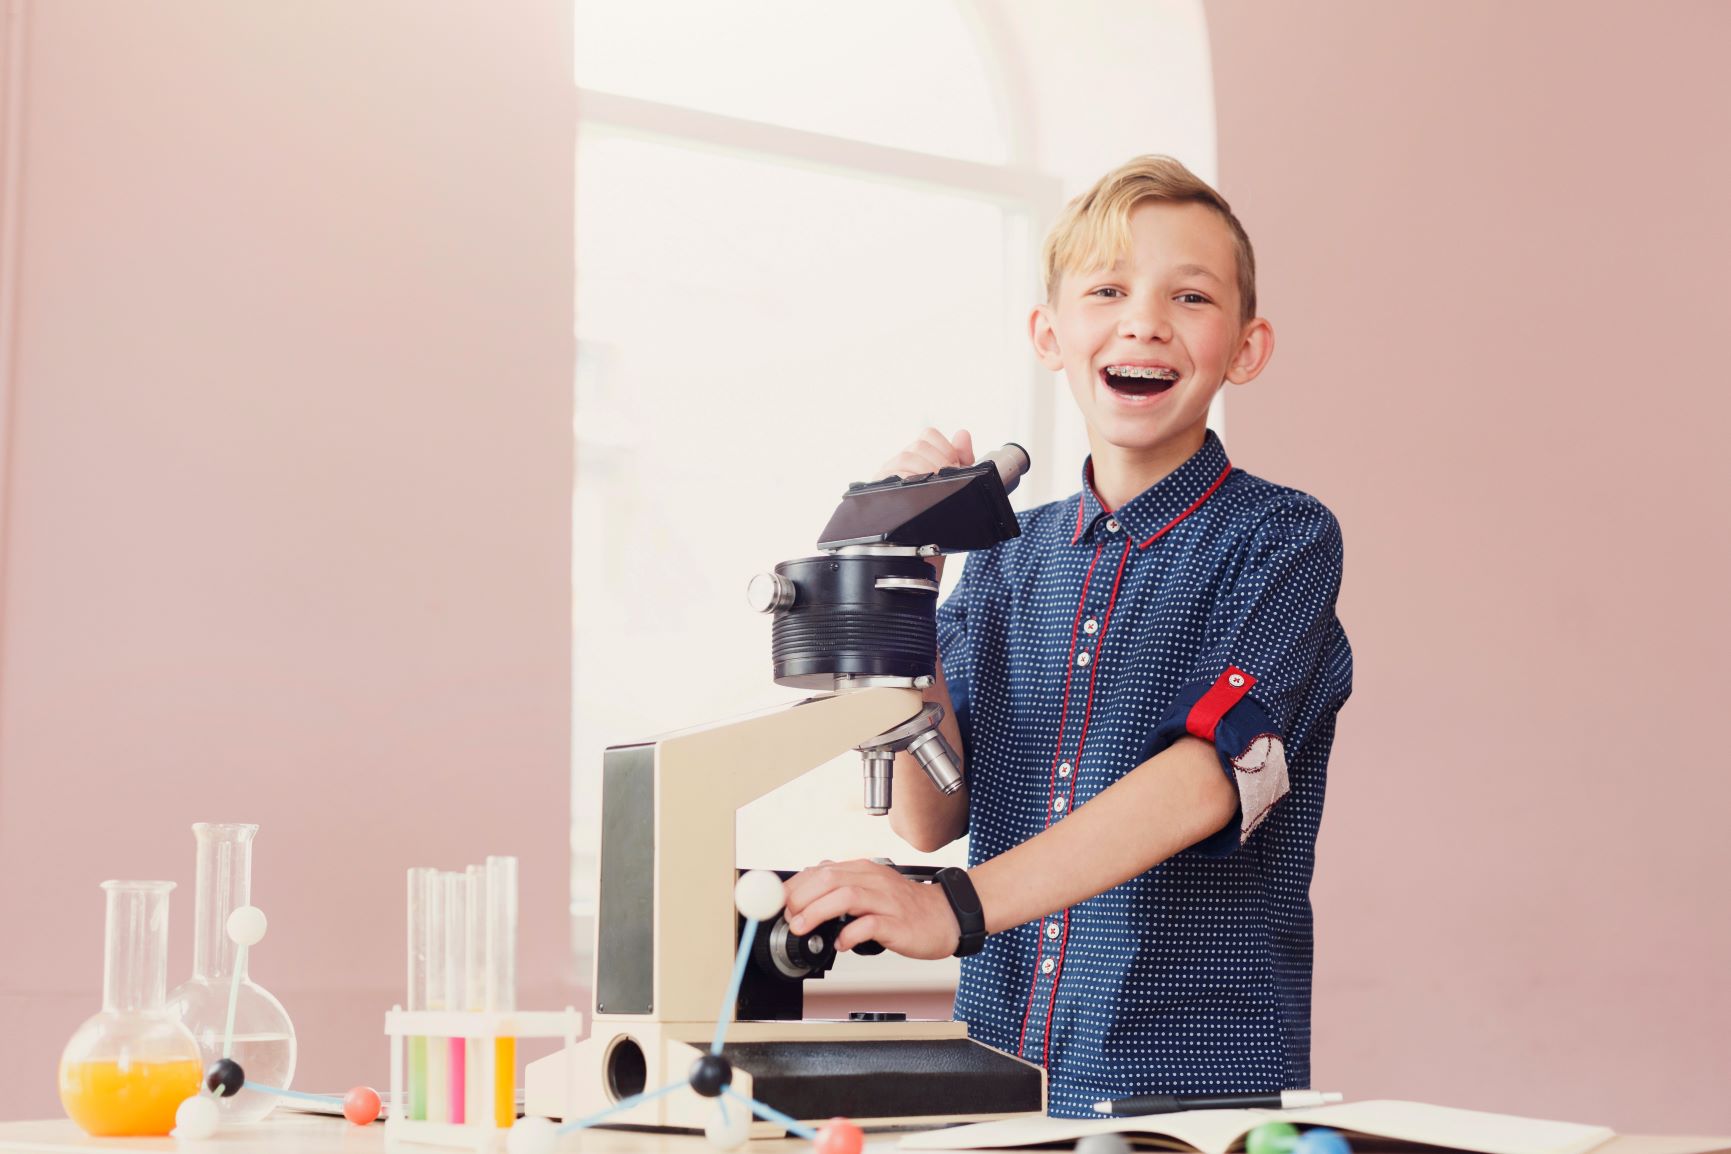 Microscopes Can Encourage Kids into Science Later in Life